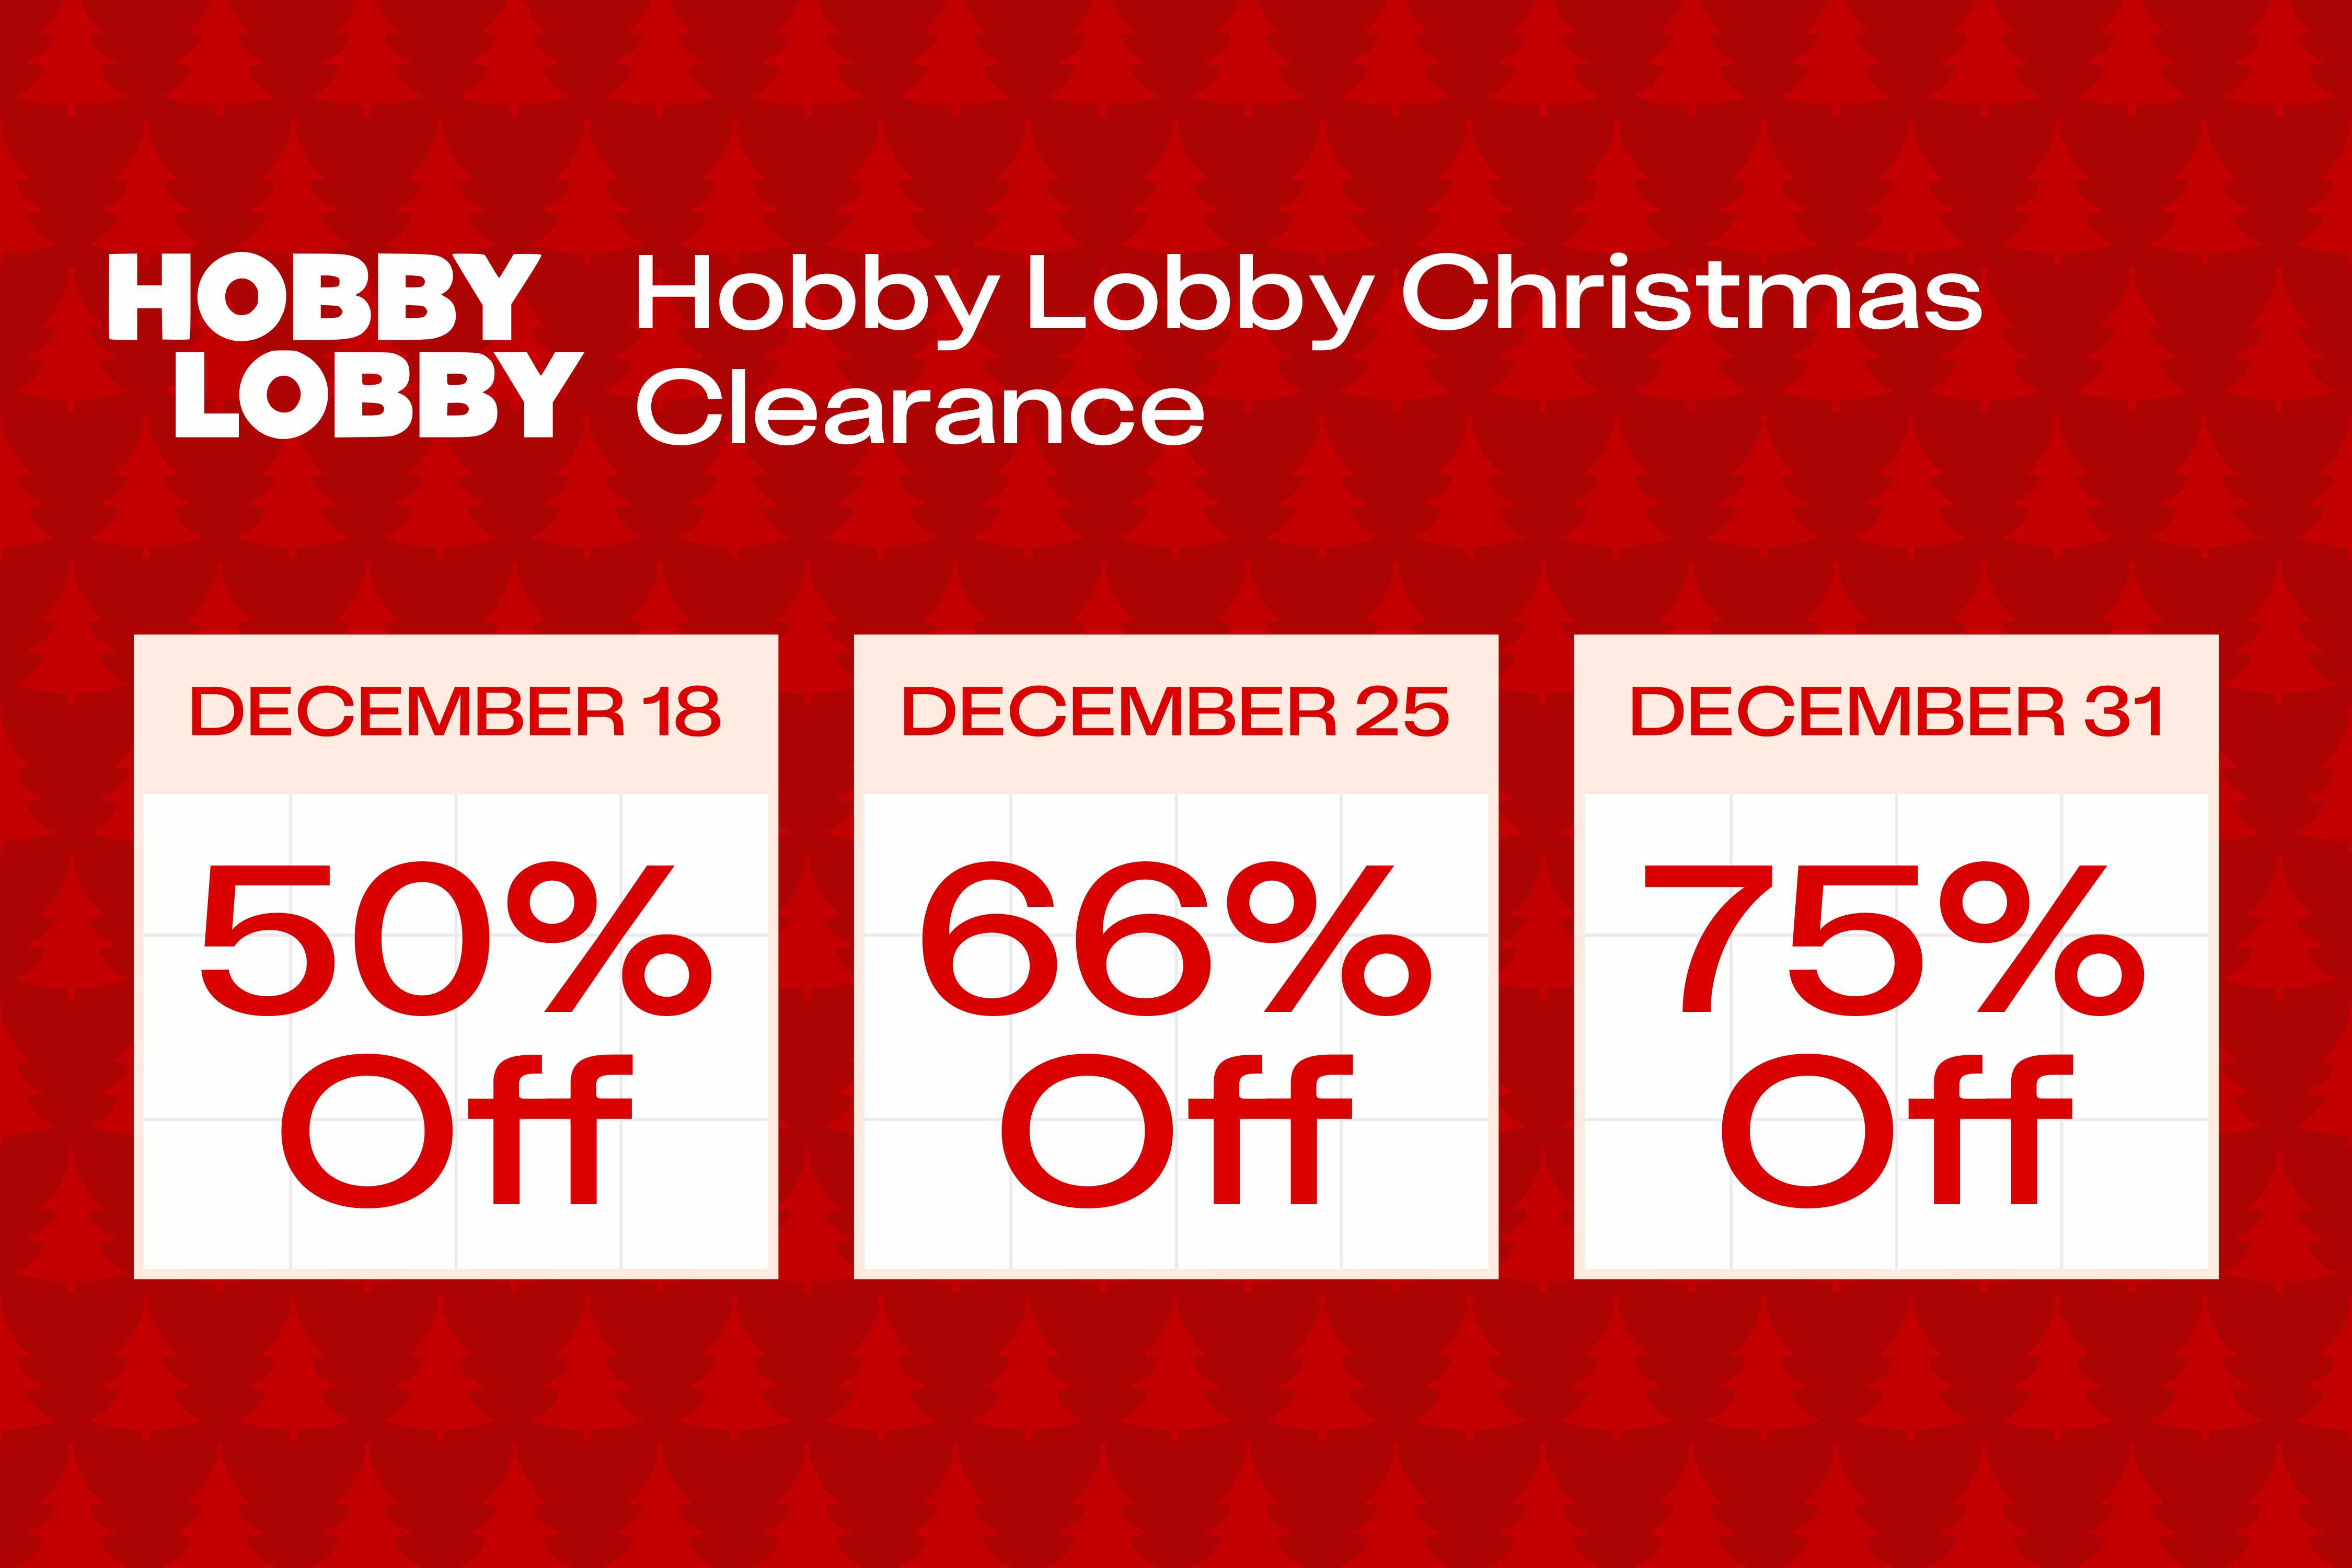 https://prod-cdn-thekrazycouponlady.imgix.net/wp-content/uploads/2019/03/hobby-lobby-christmas-clearance-1703860335-1703860335.png?auto=format&fit=fill&q=25